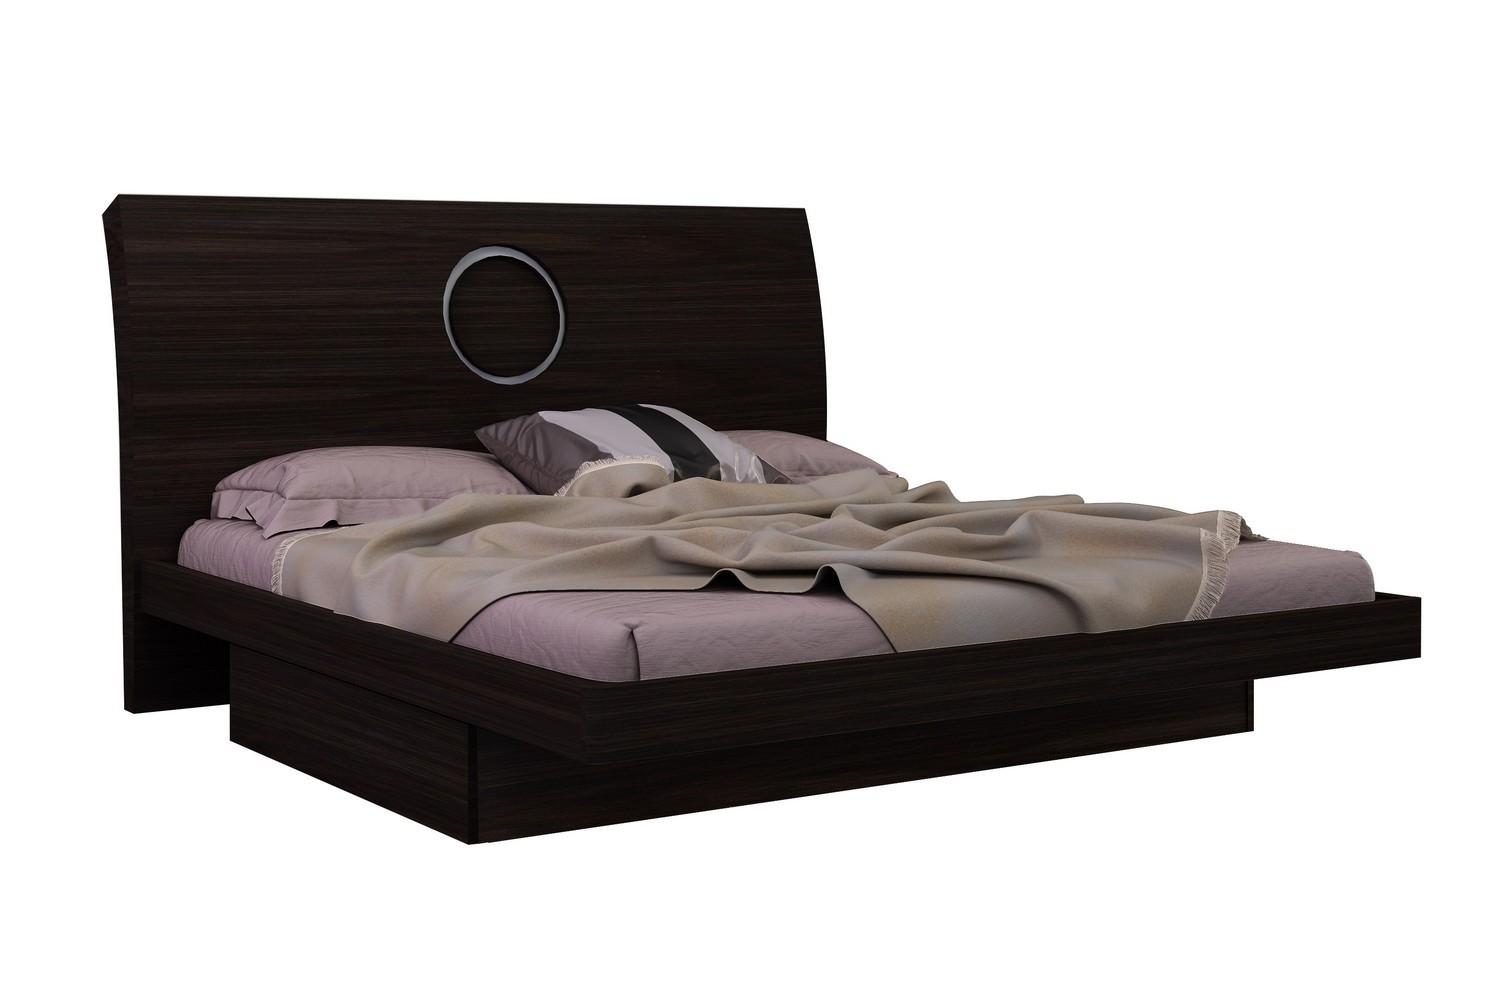 Contemporary, Modern Platform Bed Monte Carlo MONTE-BED-WENGE-Q in Wenge Lacquer